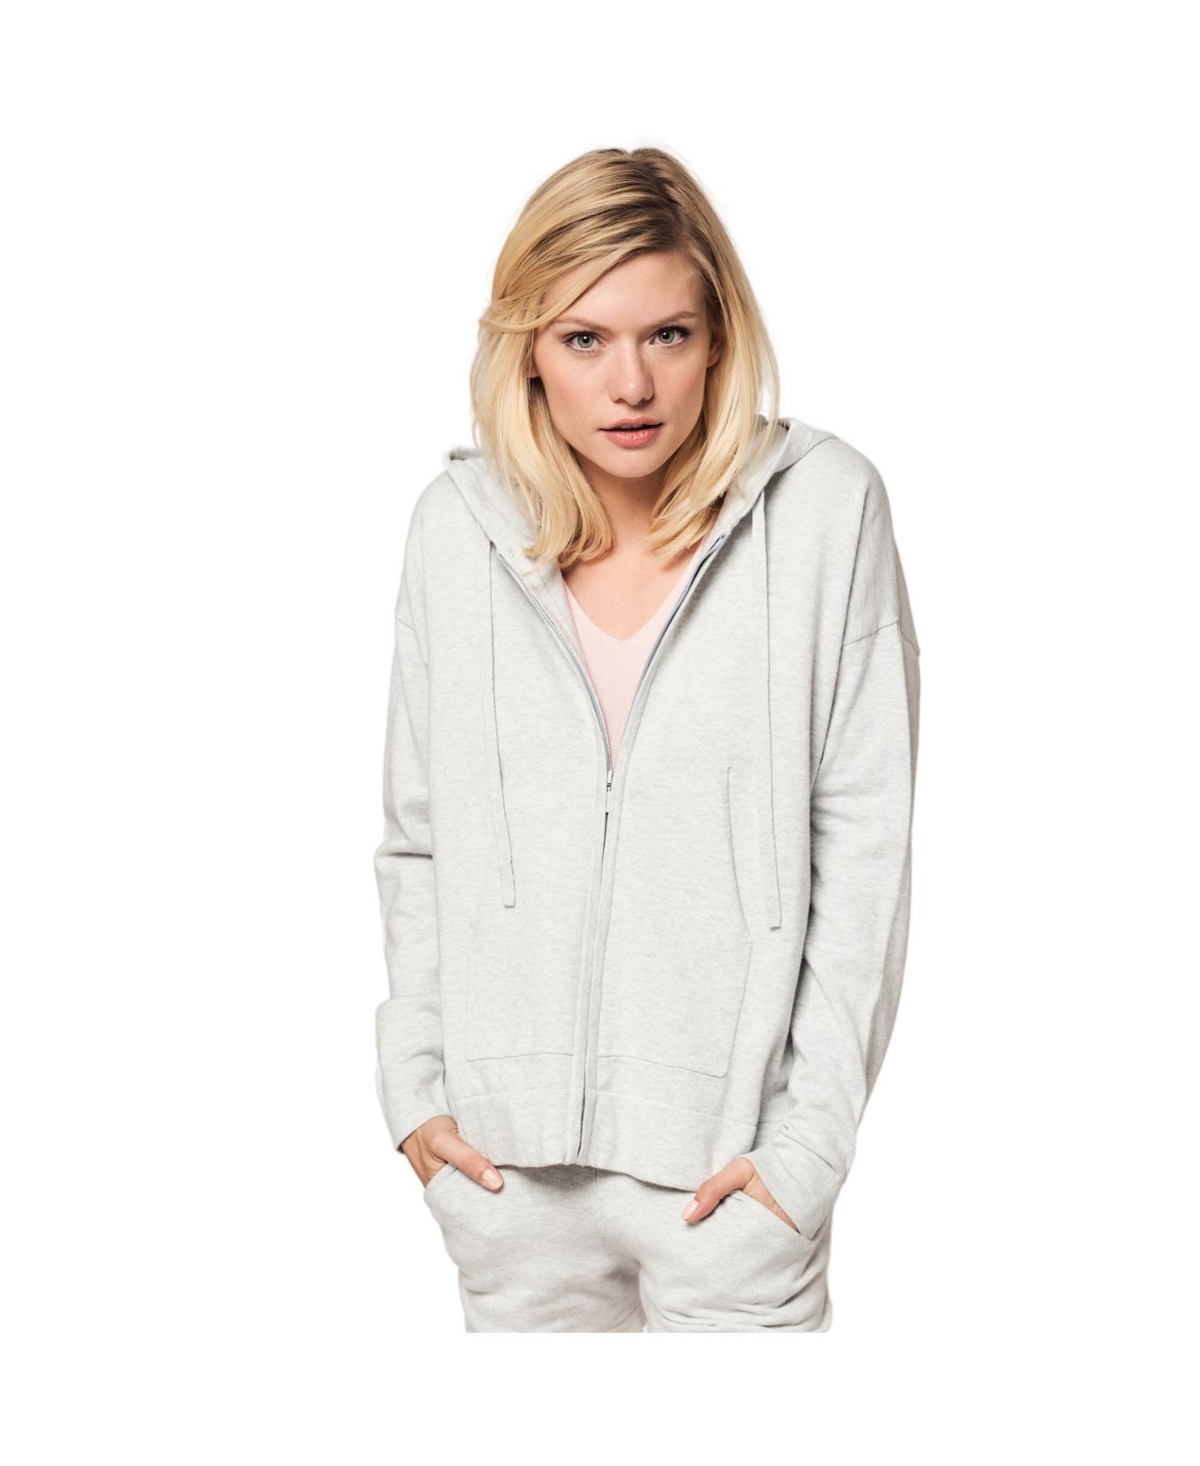 Bellemere Women's Sporty Cotton Cashmere Hoodie - Grey